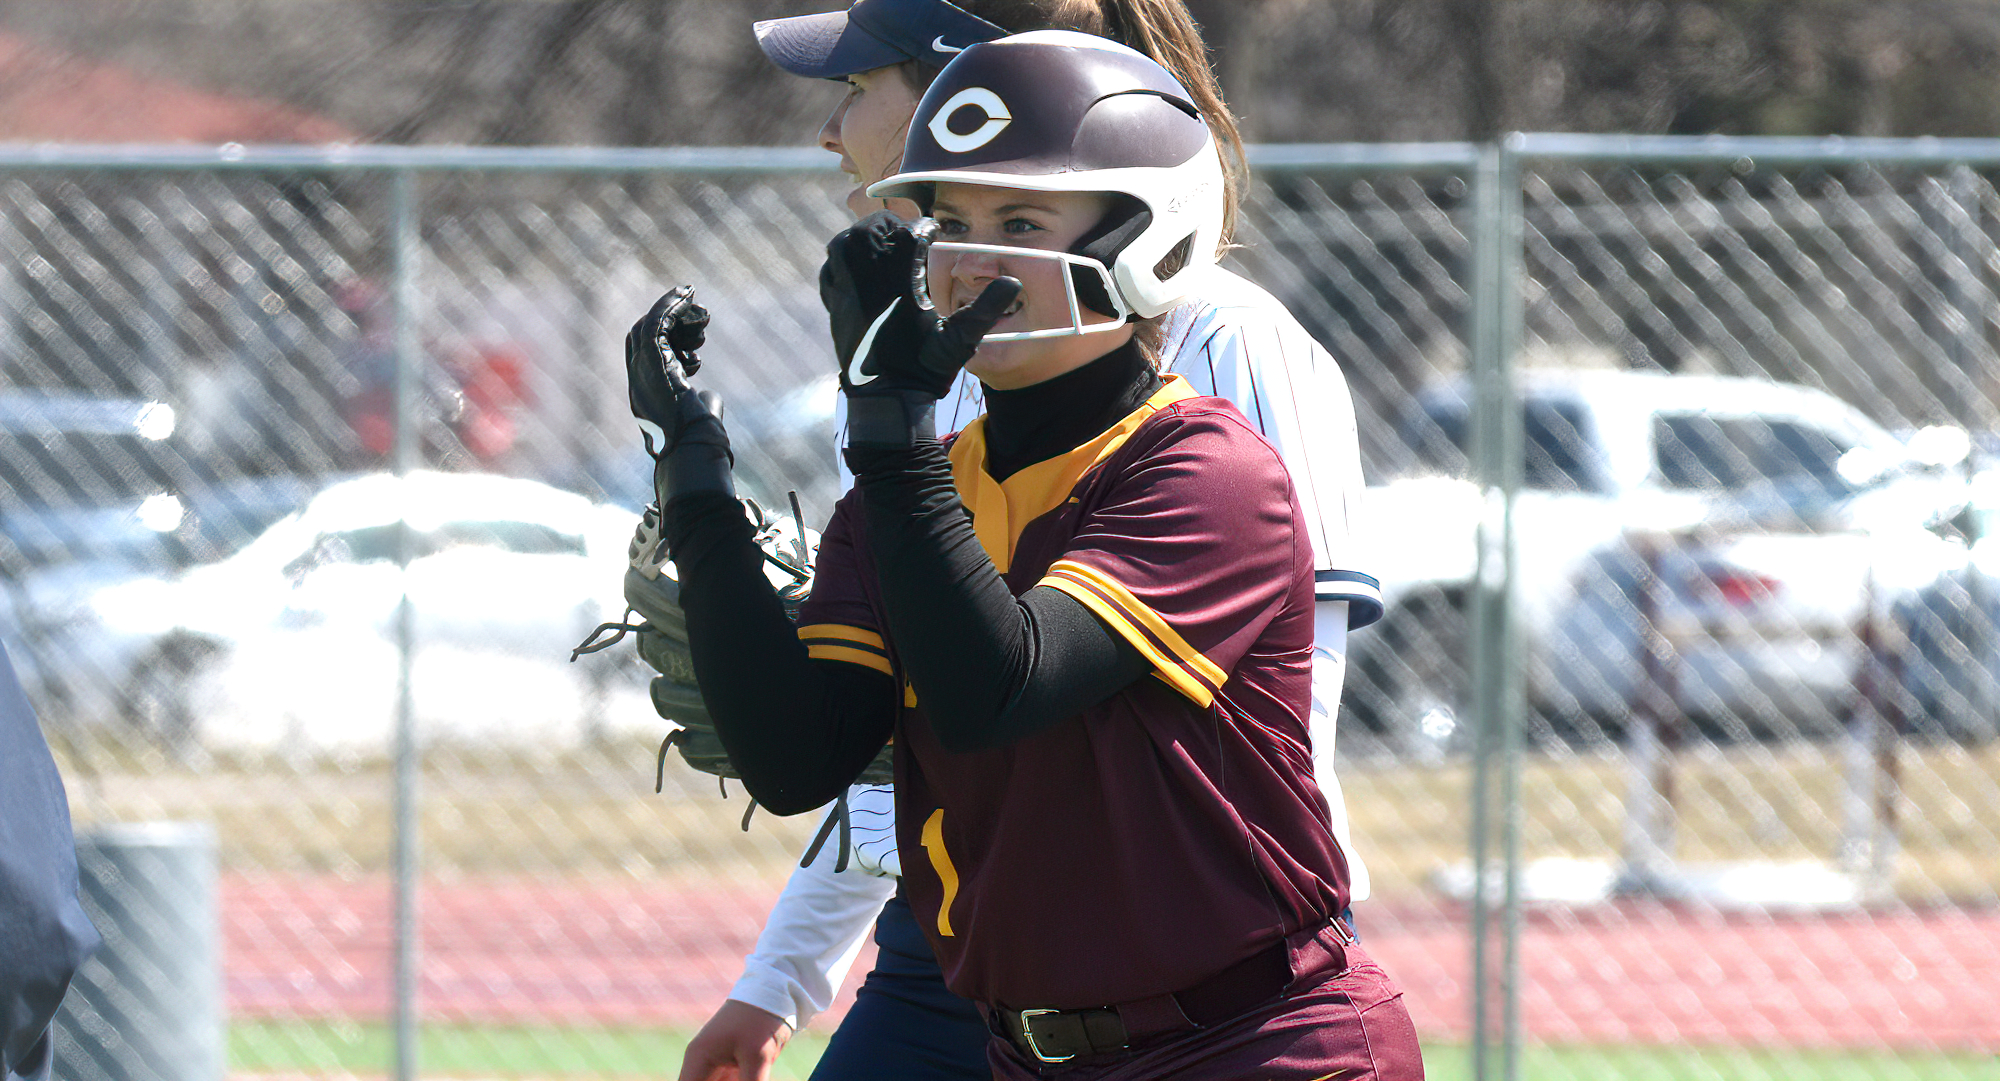 Senior Emma Redlin had a dramatic 2-out, game-tying double in the bottom of the seventh inning in Cobbers' game with Allegheny.